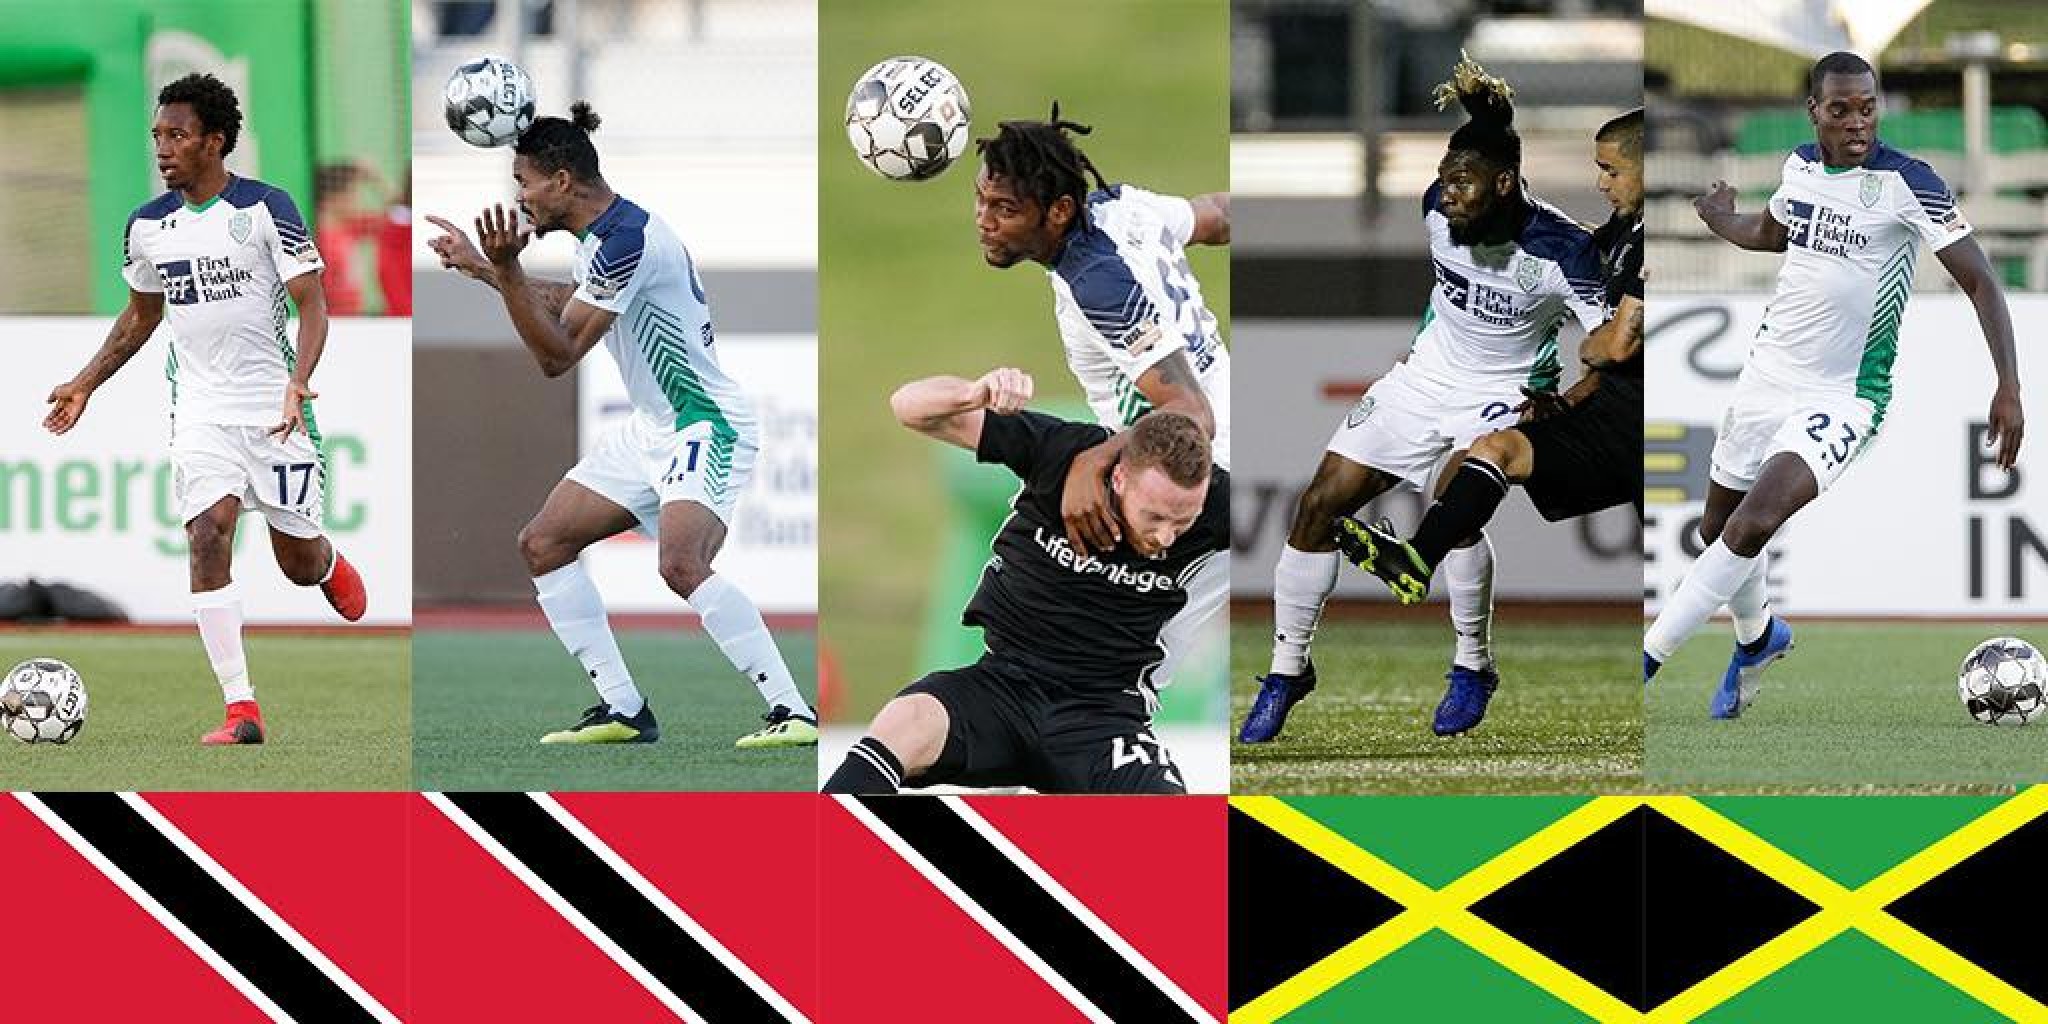 FIVE ENERGY FC PLAYERS SELECTED TO PROVISIONAL GOLD CUP ROSTERS